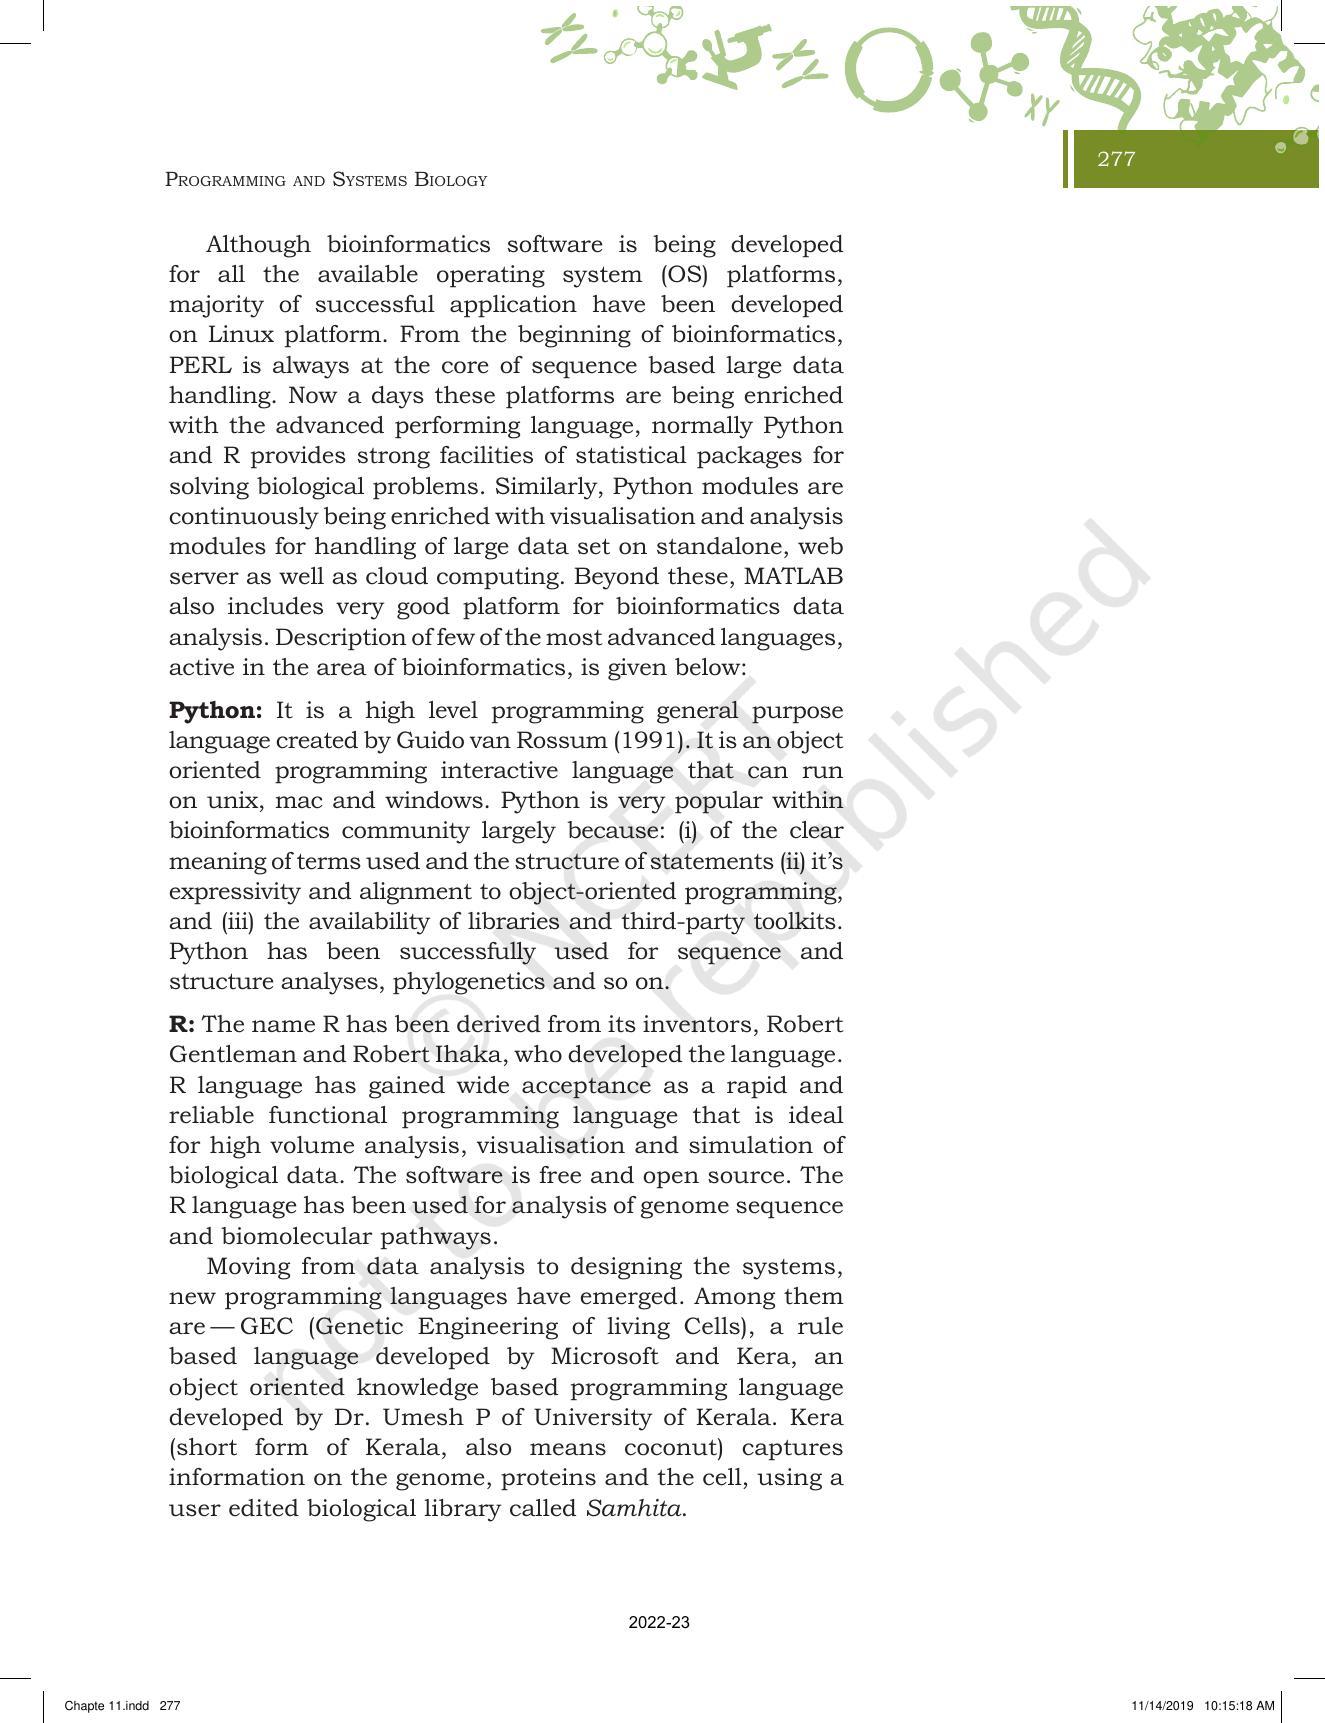 NCERT Book for Class 11 Biotechnology Chapter 11 Programming and Systems Biology - Page 2